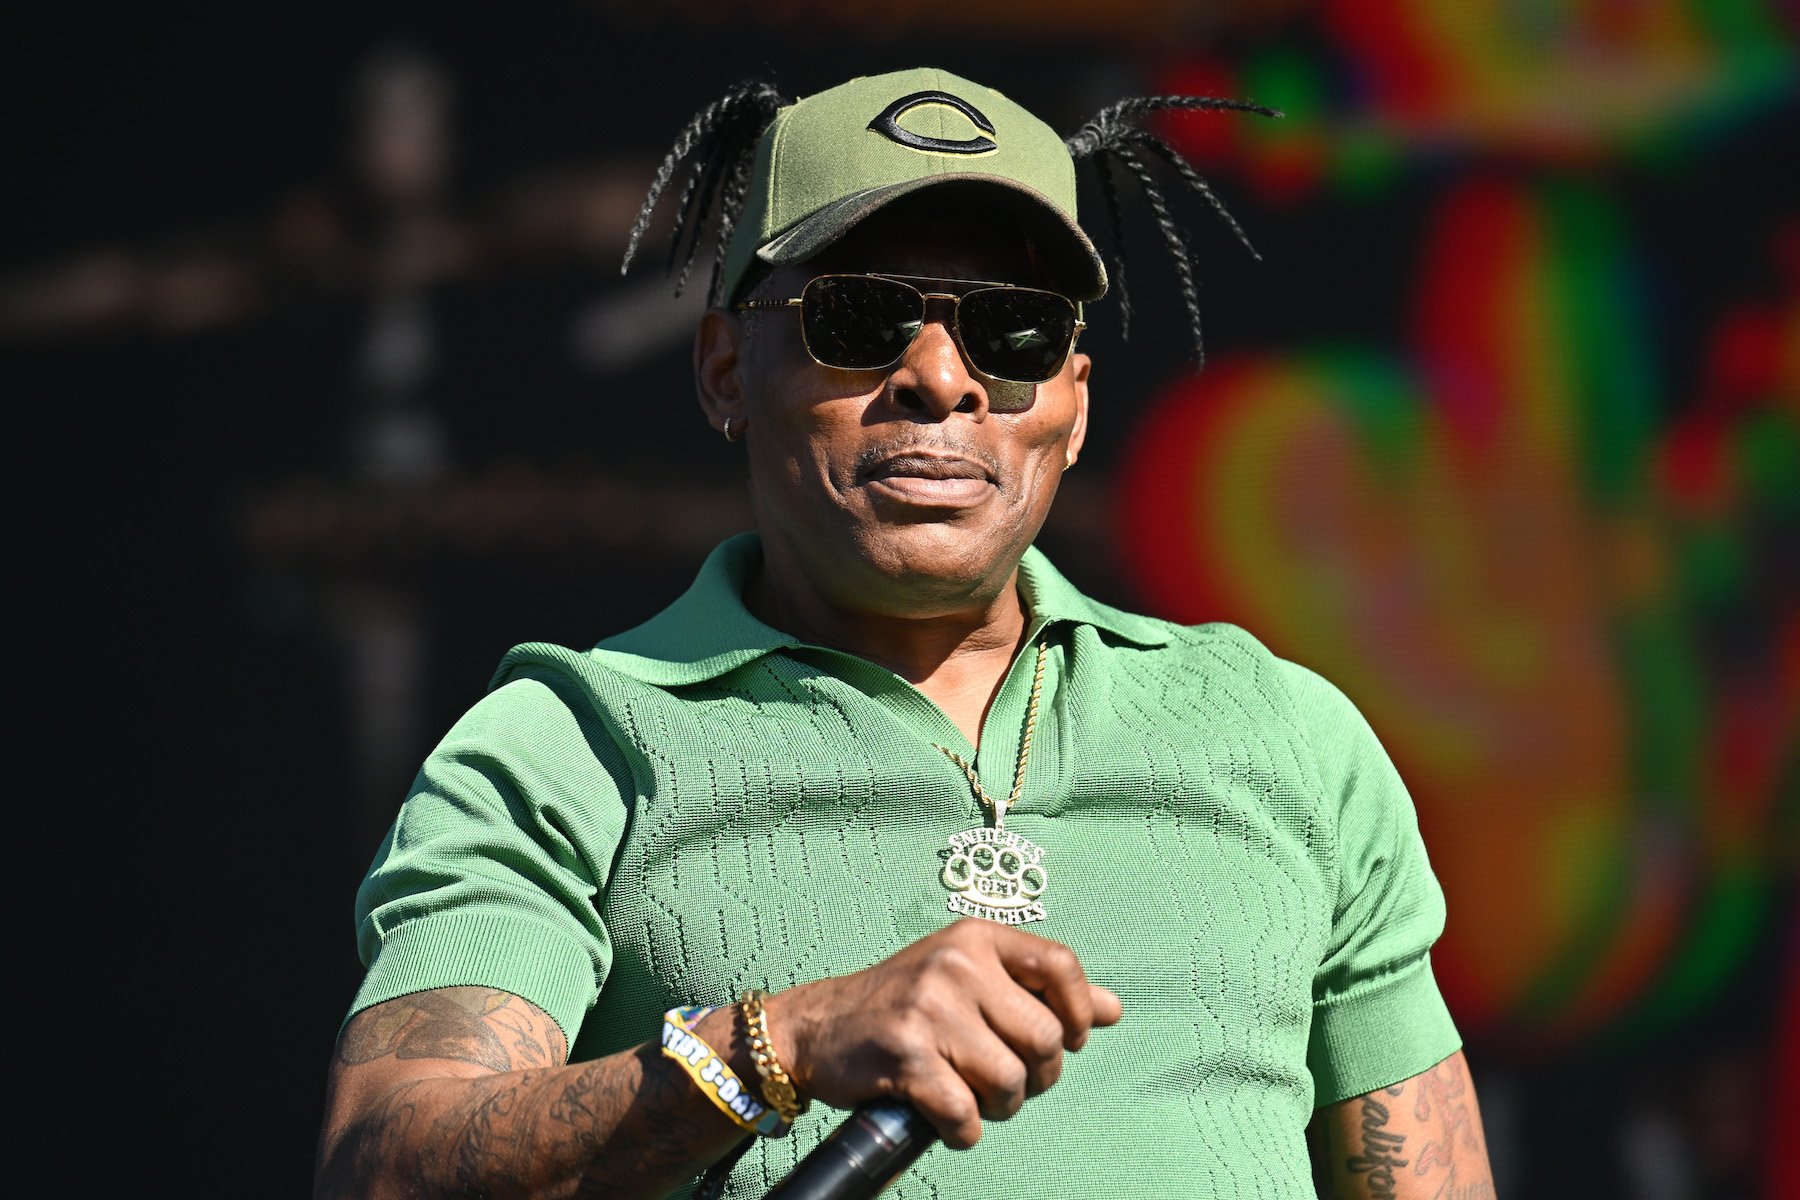 Coolio Performed the Theme Song For a Beloved ’90s Nickelodeon Show